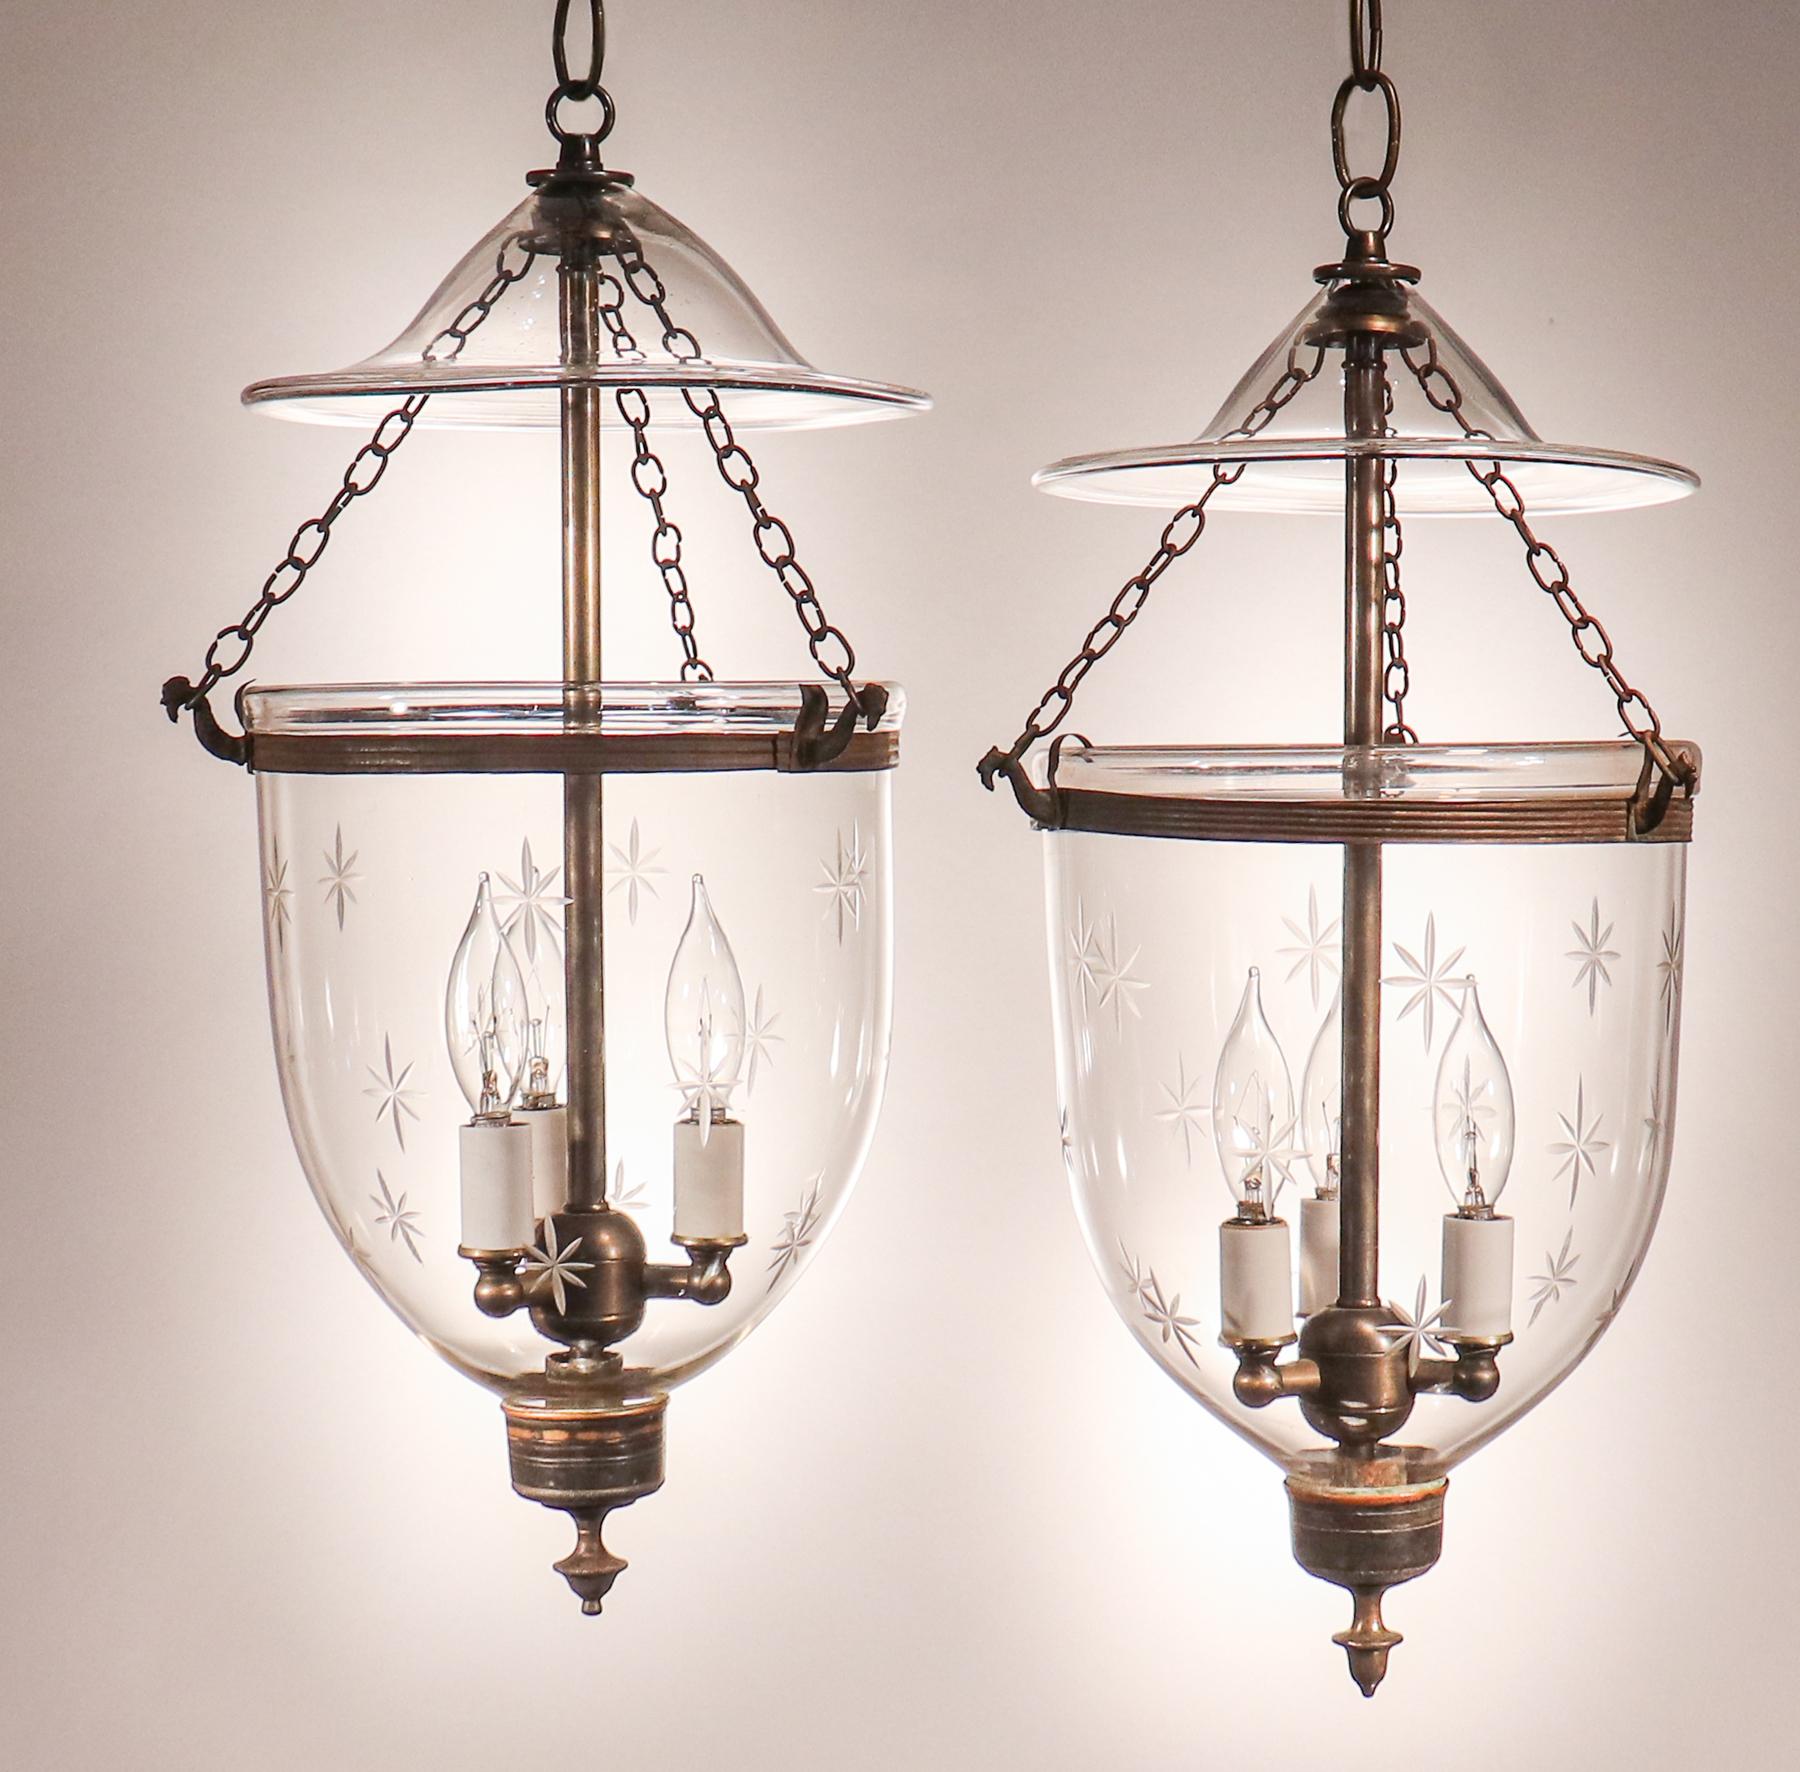 A pair of petite bell jar lanterns with lovely form and a finely etched star motif. These circa 1870 lanterns feature original brass bands and finials/candle holder bases with great patina. The pendant lights have been newly electrified, each with a